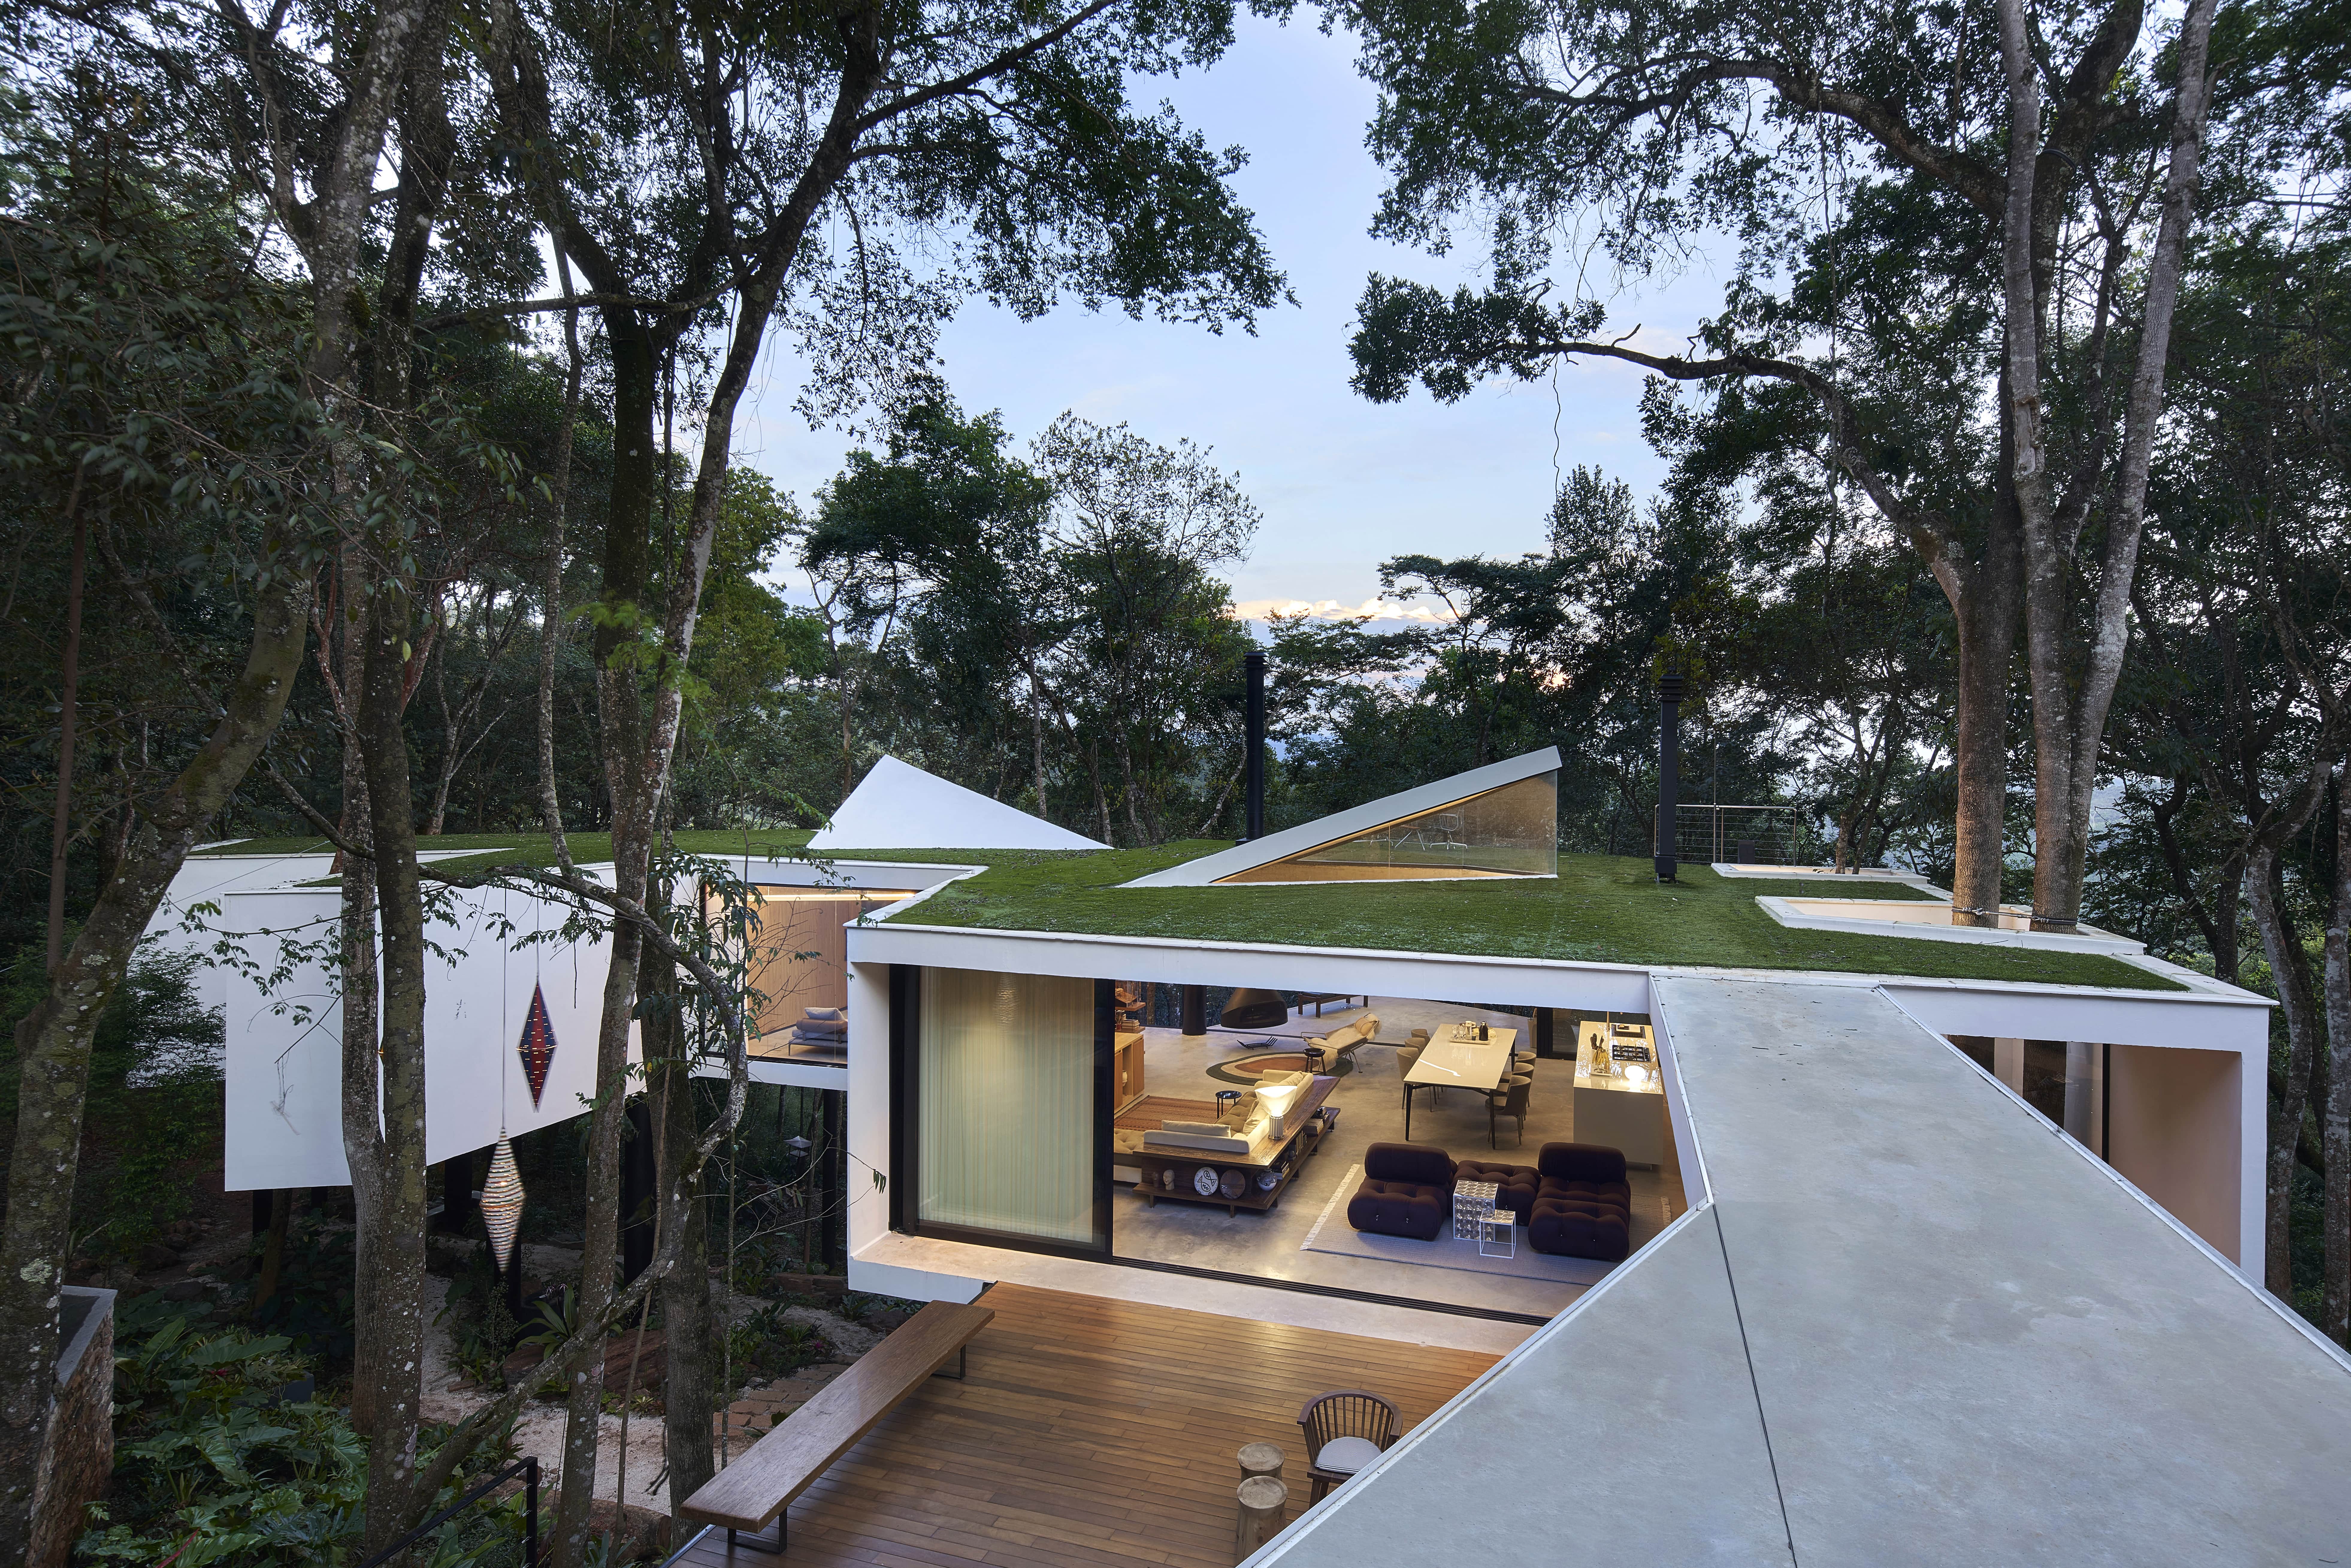 There is plenty of space at Casa AÃ§ucena where you can enjoy the treetop views